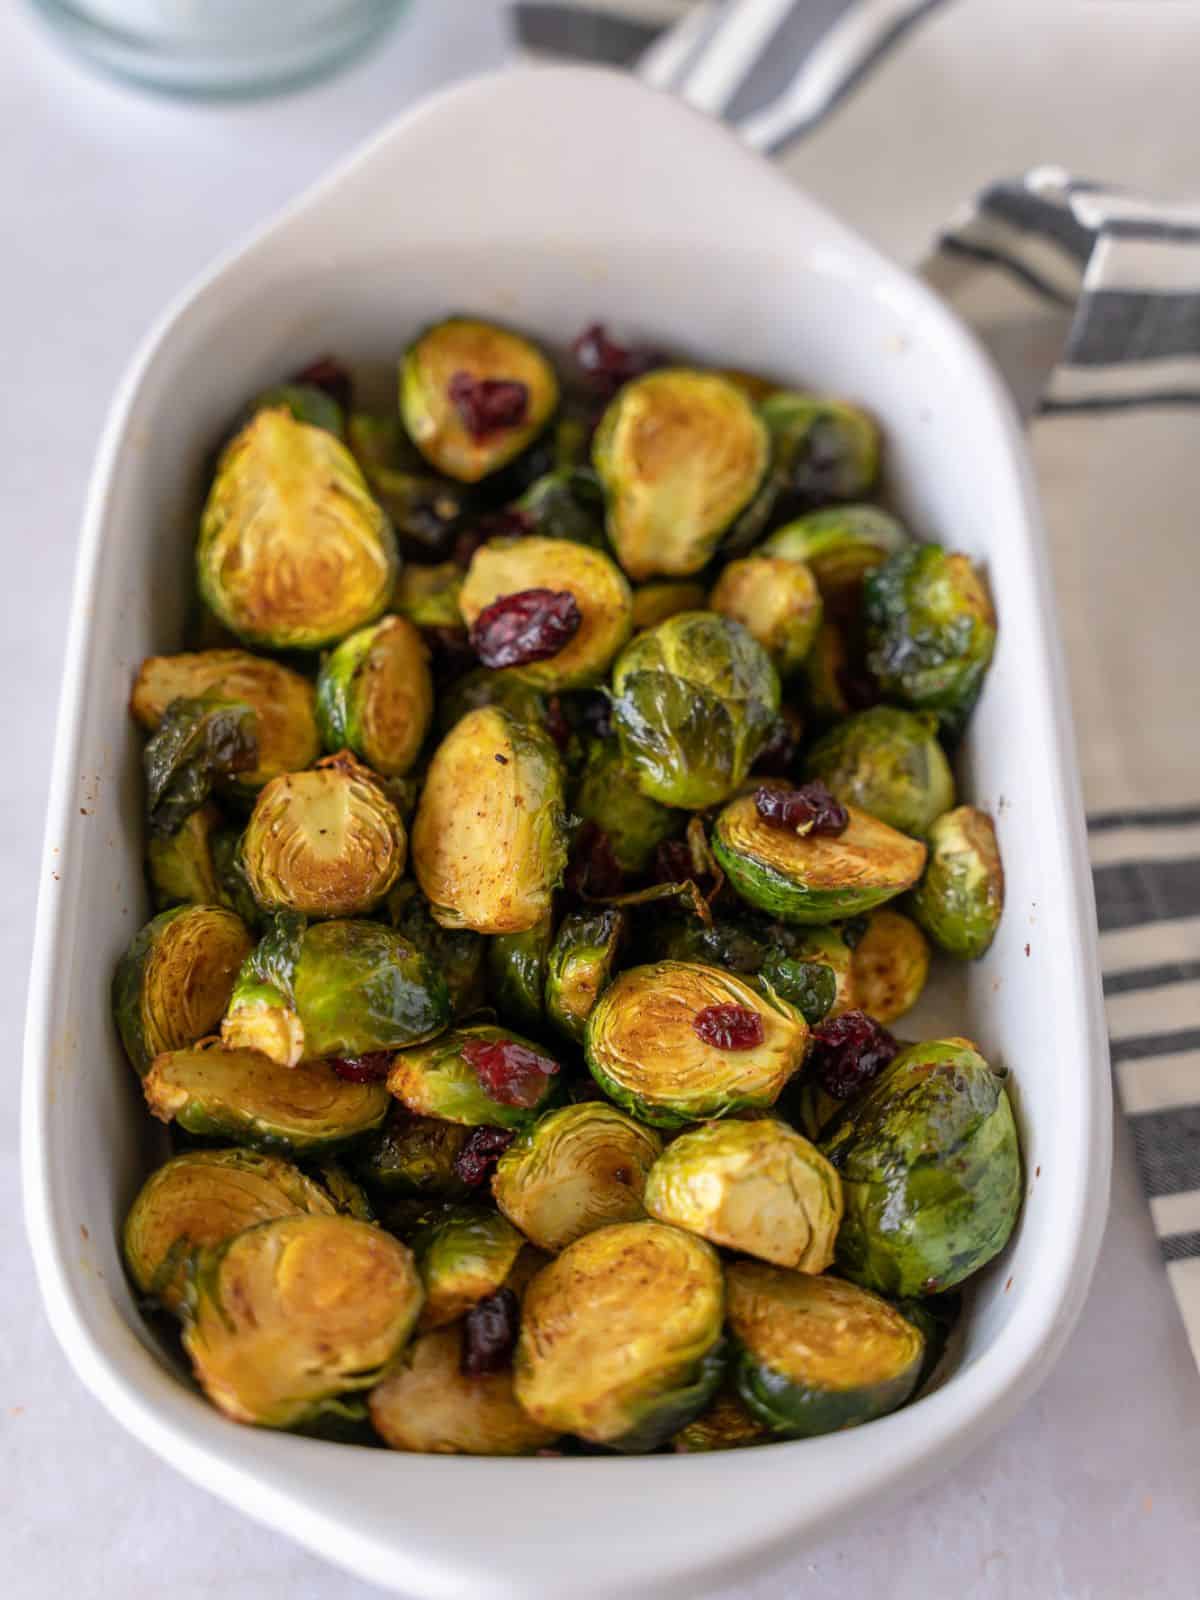 Roasted brussels sprouts in a white dish.